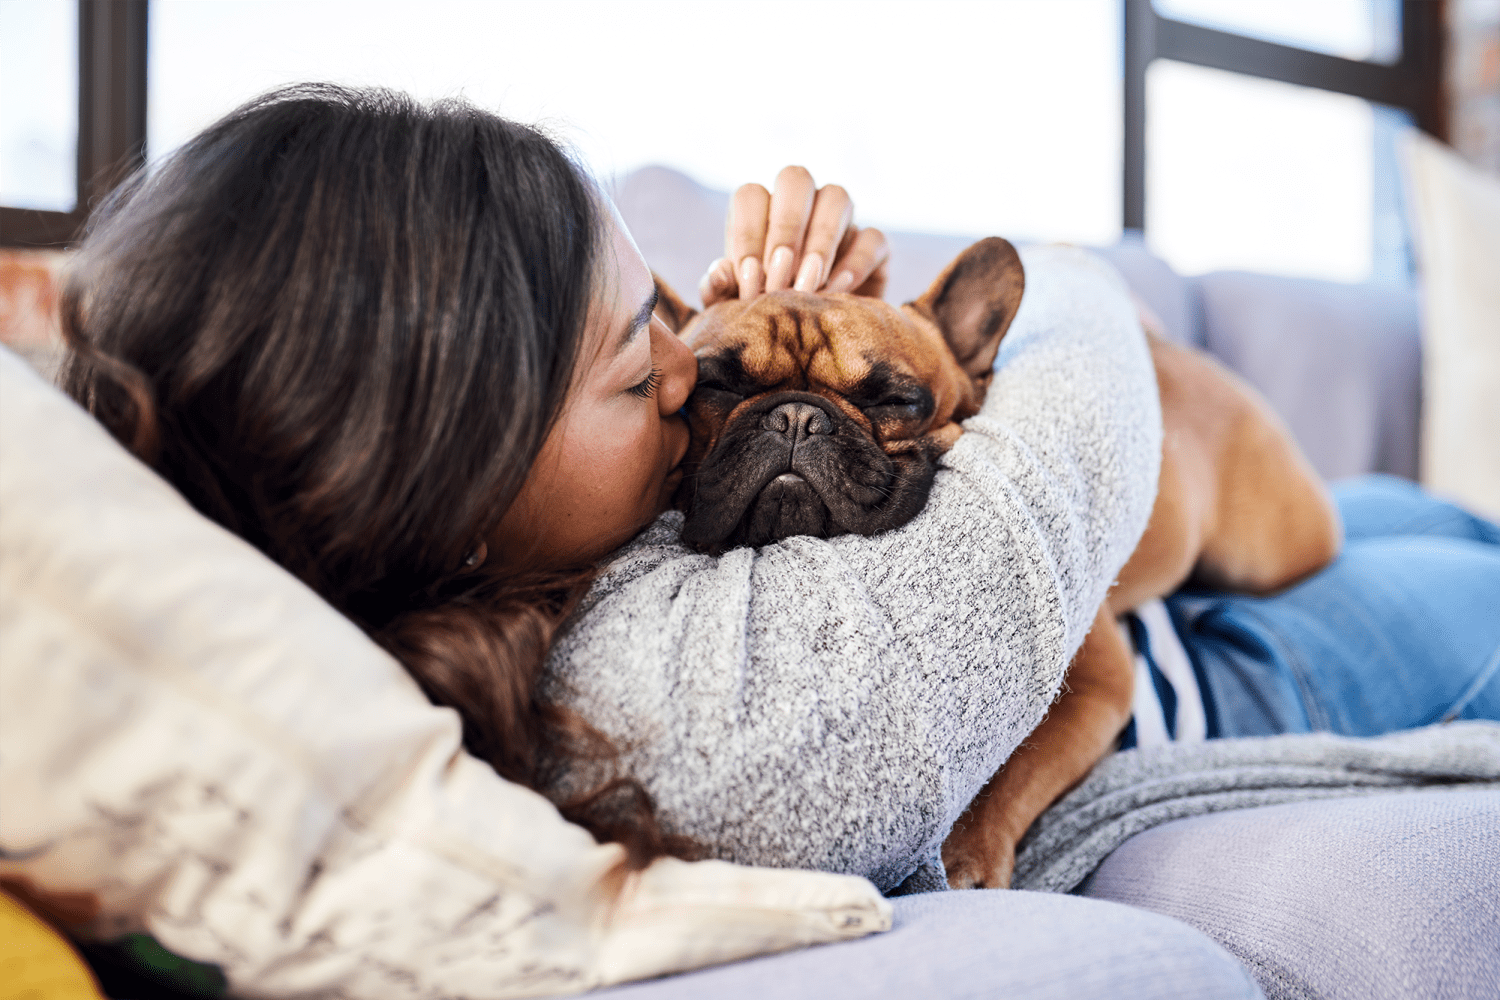 Resident snuggling with her French bulldog at Marchwood Apartment Homes in Exton, Pennsylvania